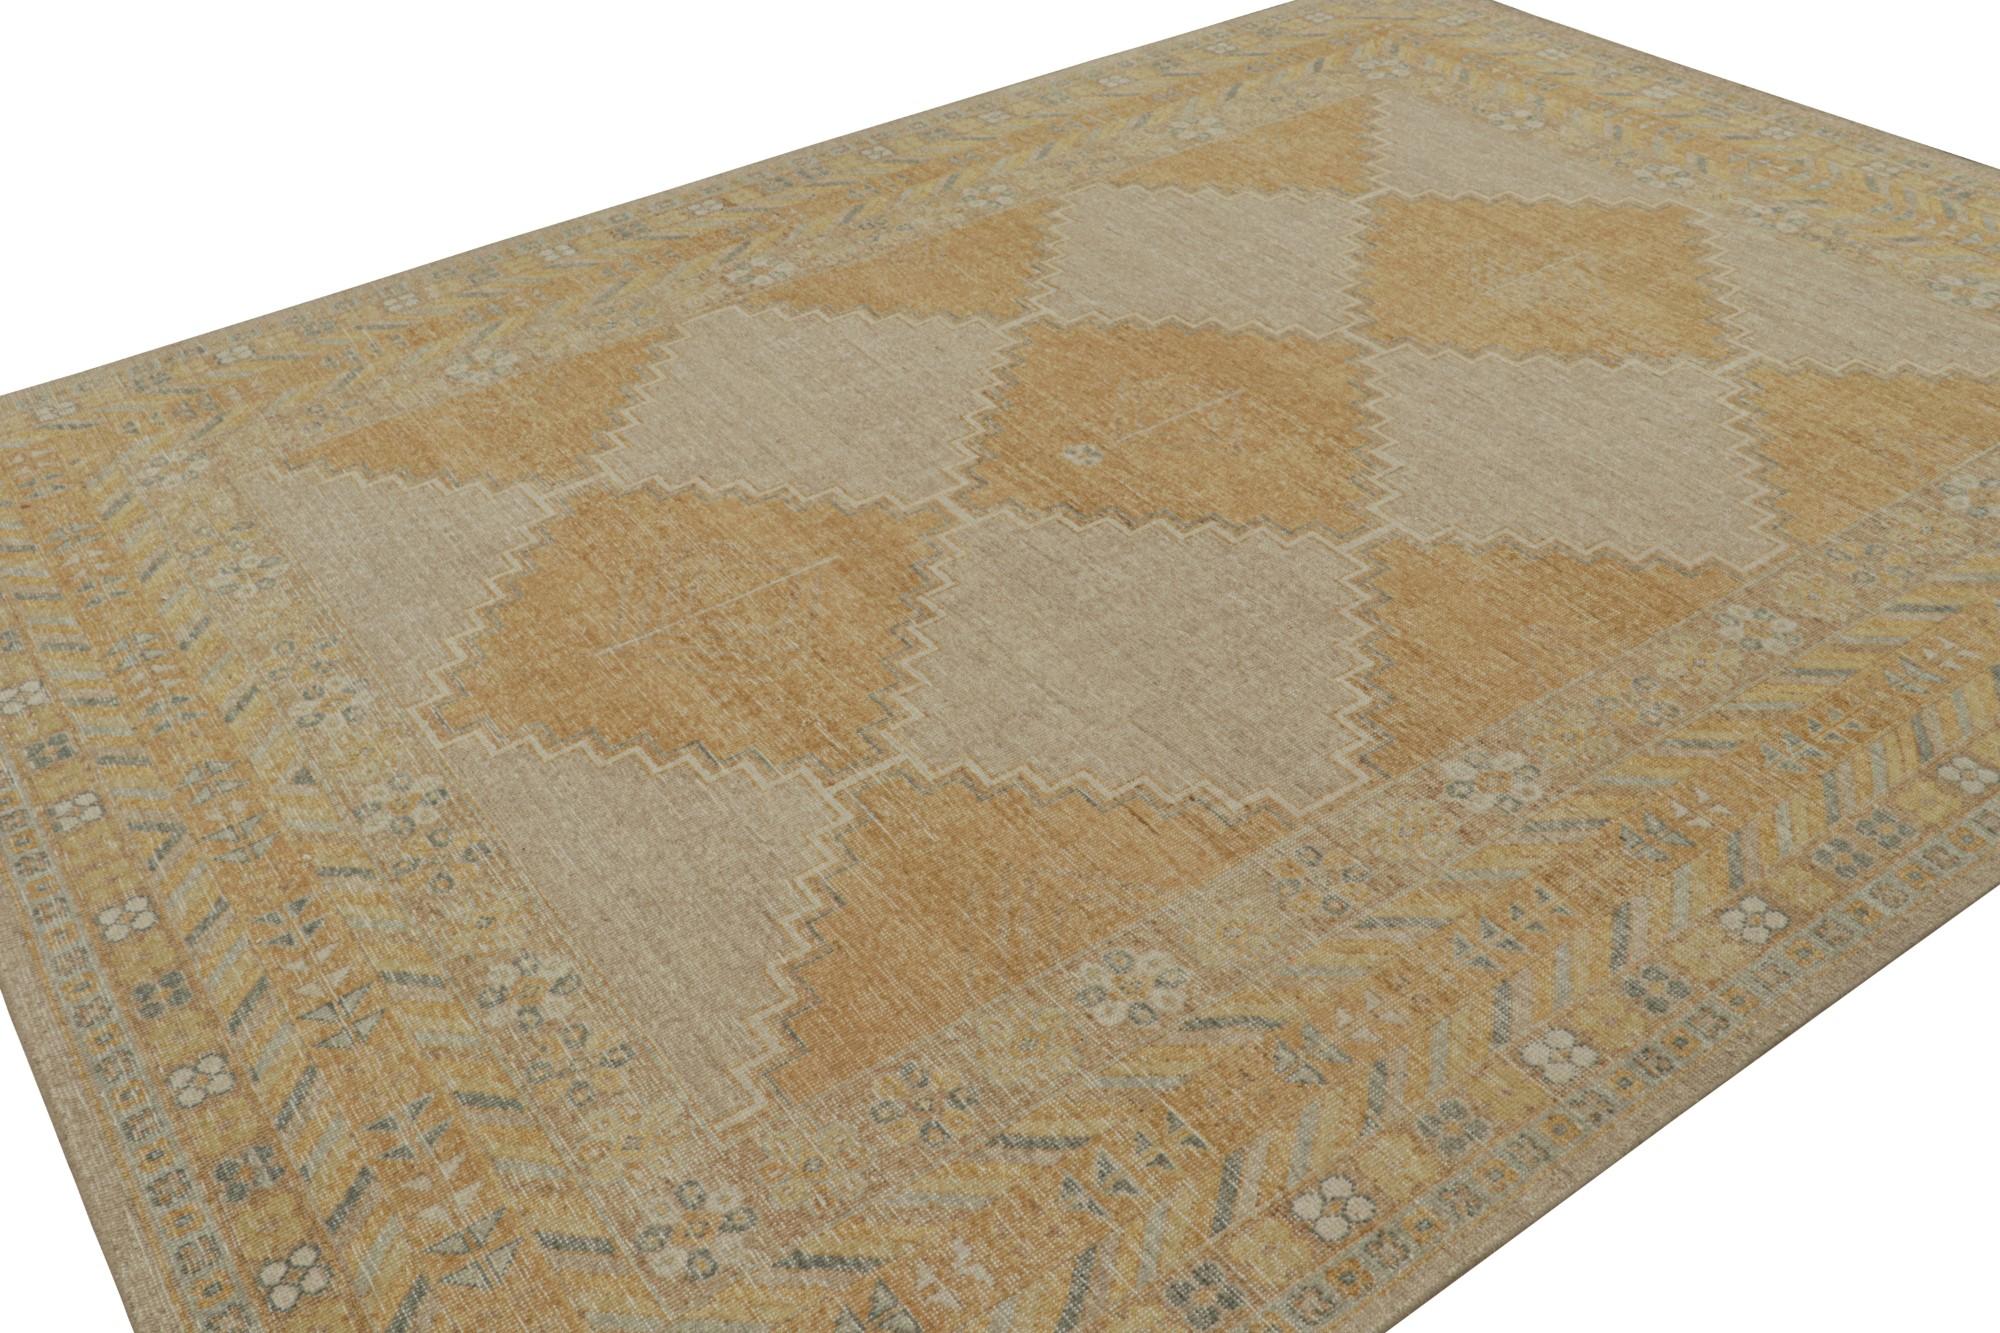 This 9x12 rug is a grand new addition to the Homage Collection by Rug & Kilim. Hand-knotted in wool, its design captures geometric patterns and a rich colorway of beige/brown, gold and blue. 

On the Design: 

One almost hunts for the color in this